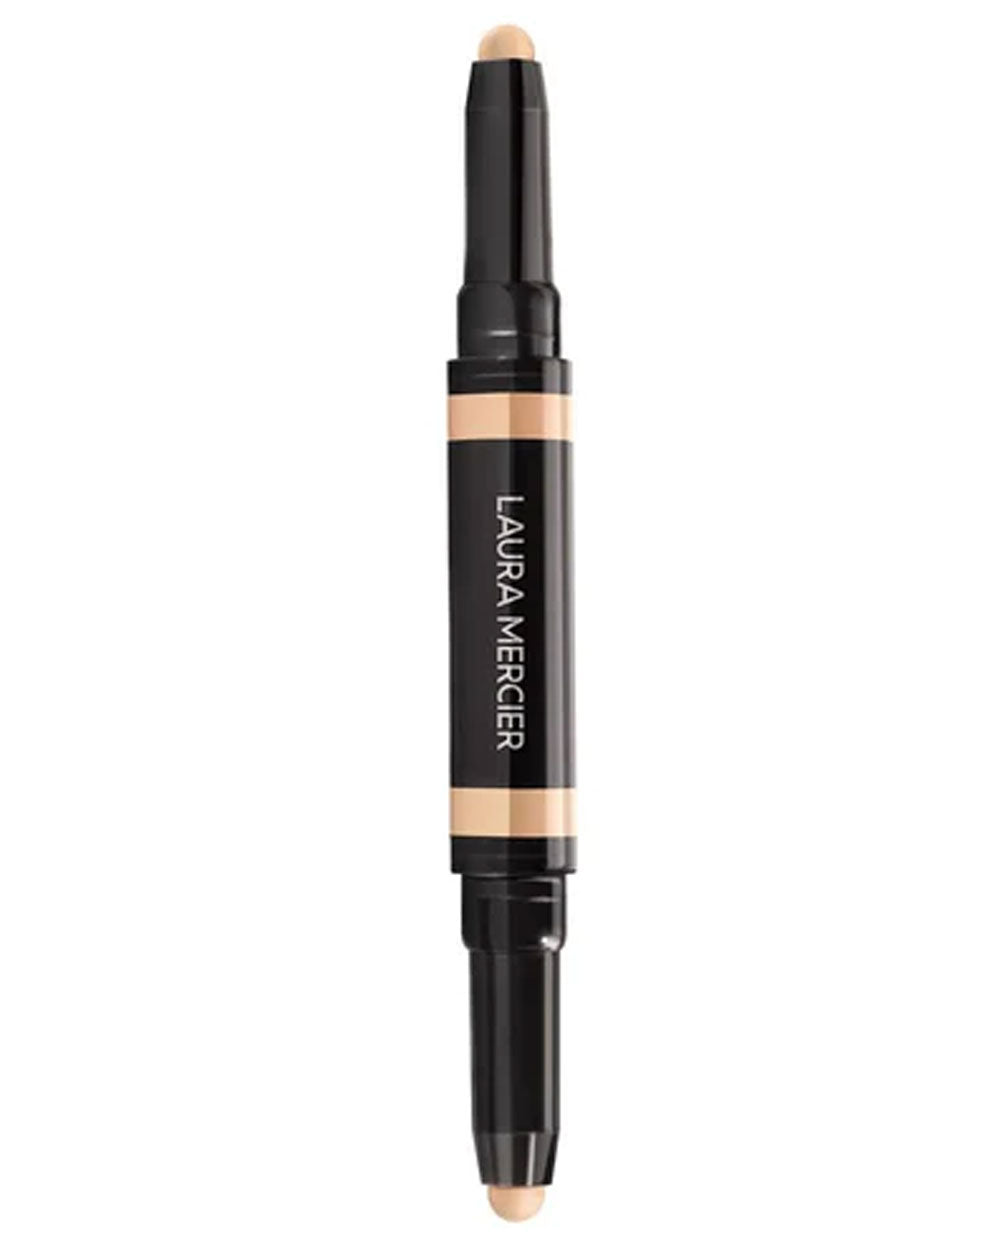 Secret Camouflage Correct and Brighten Concealer Duo Stick in 1W